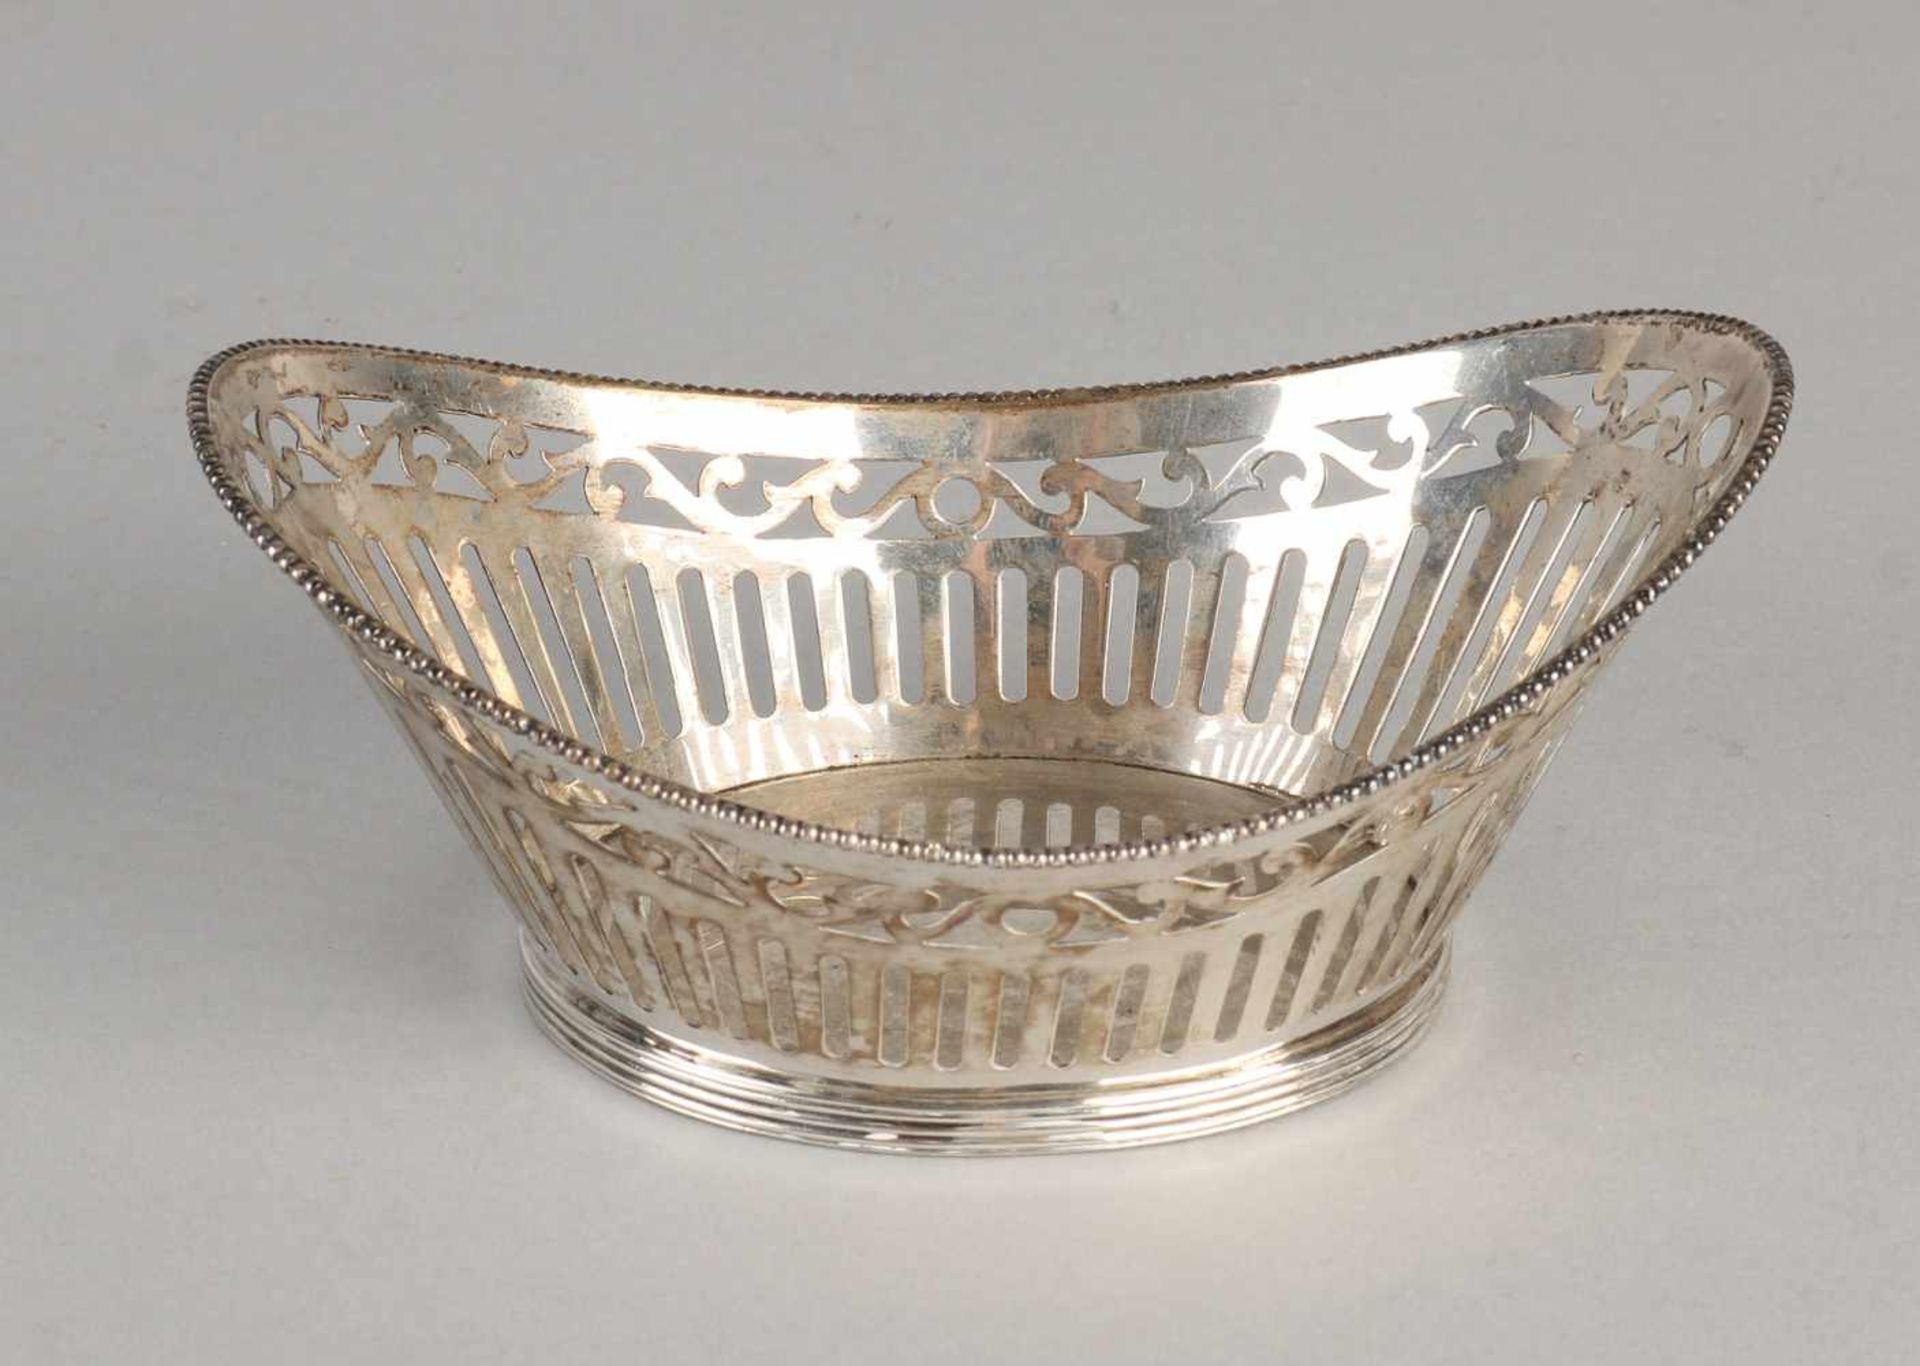 Silver bonbon basket, 835/000, boat-shaped with serrated bars and floral decor. Provided with a